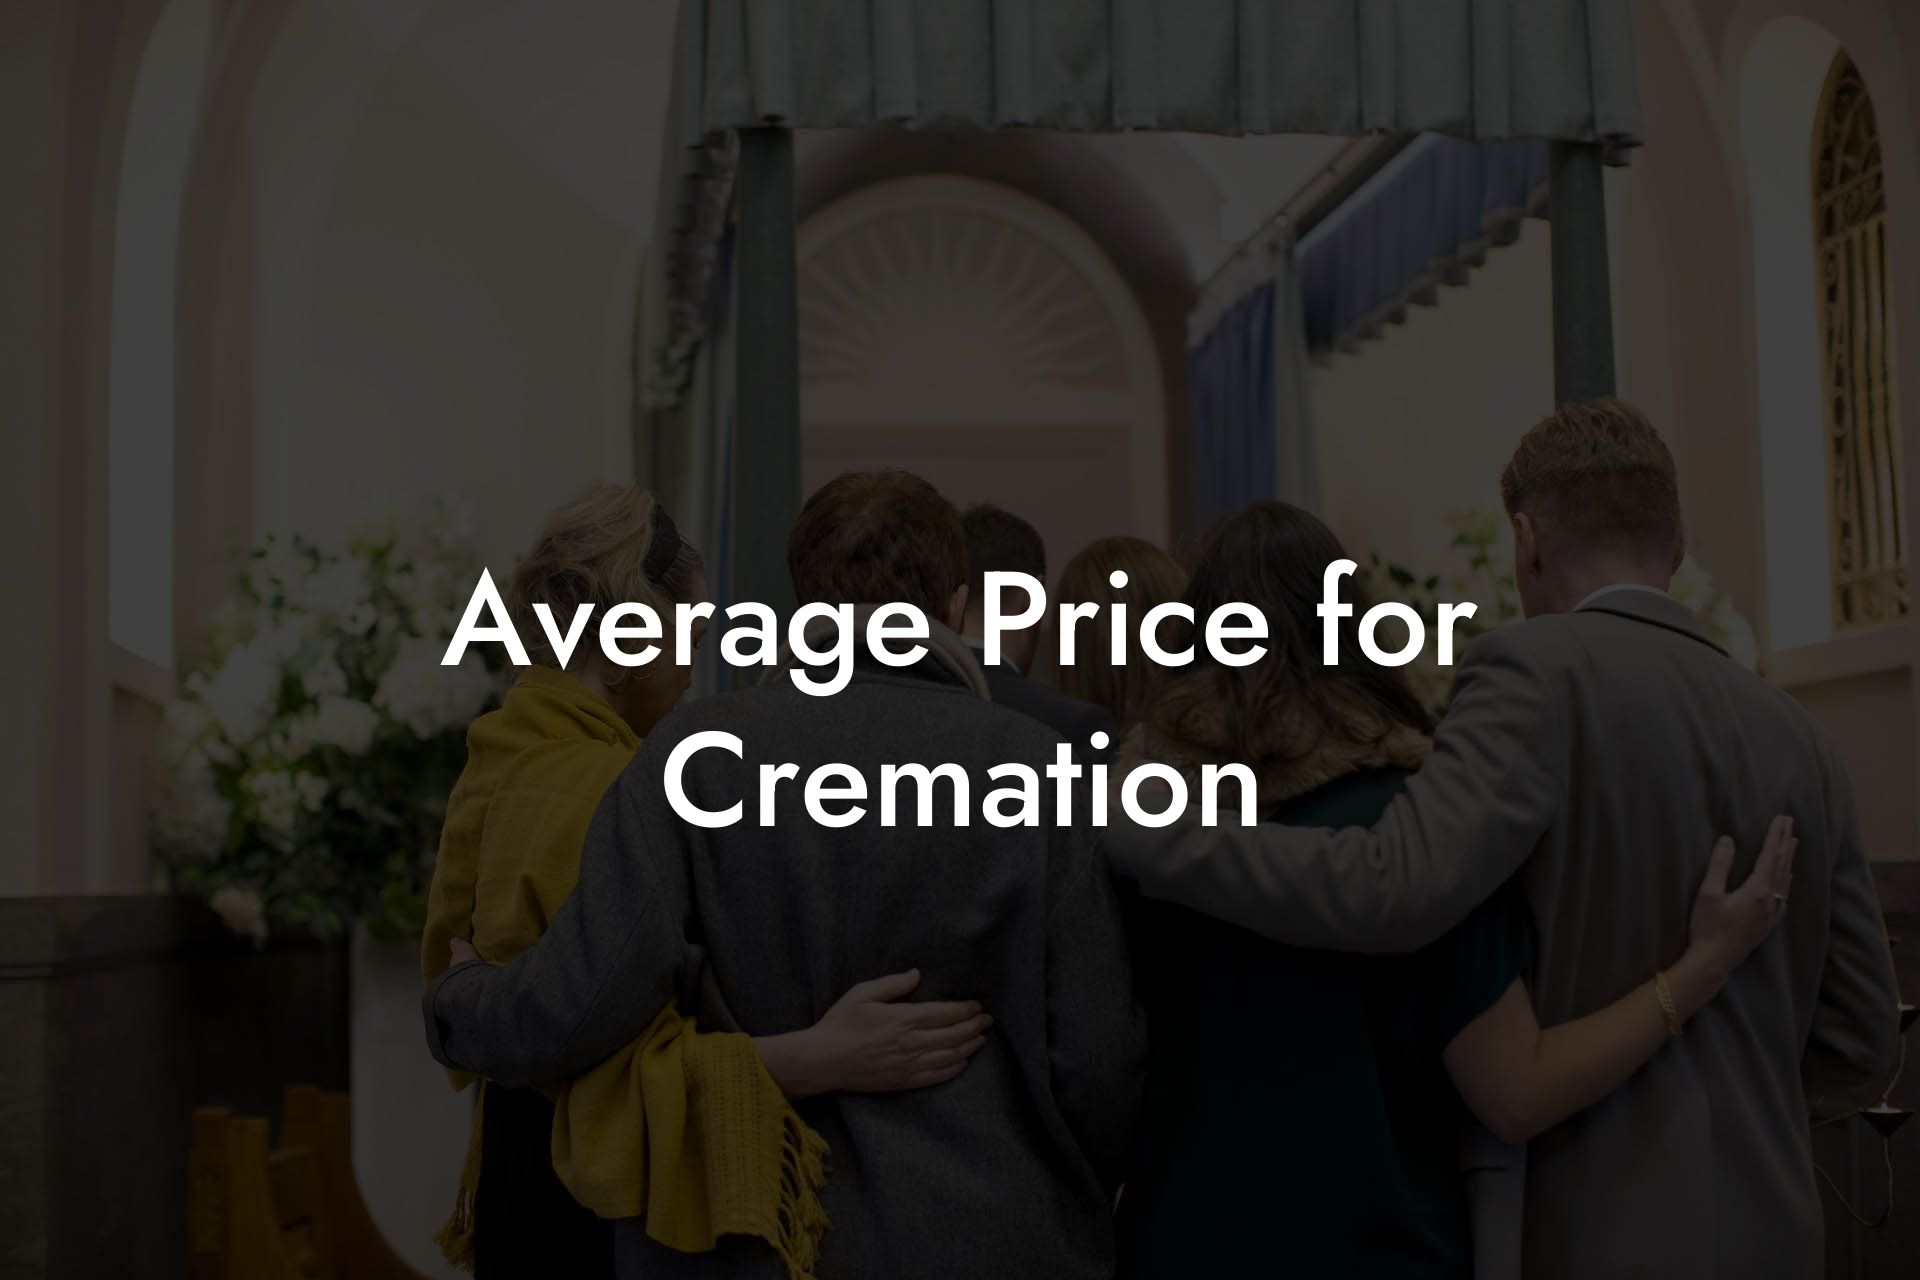 Average Price for Cremation